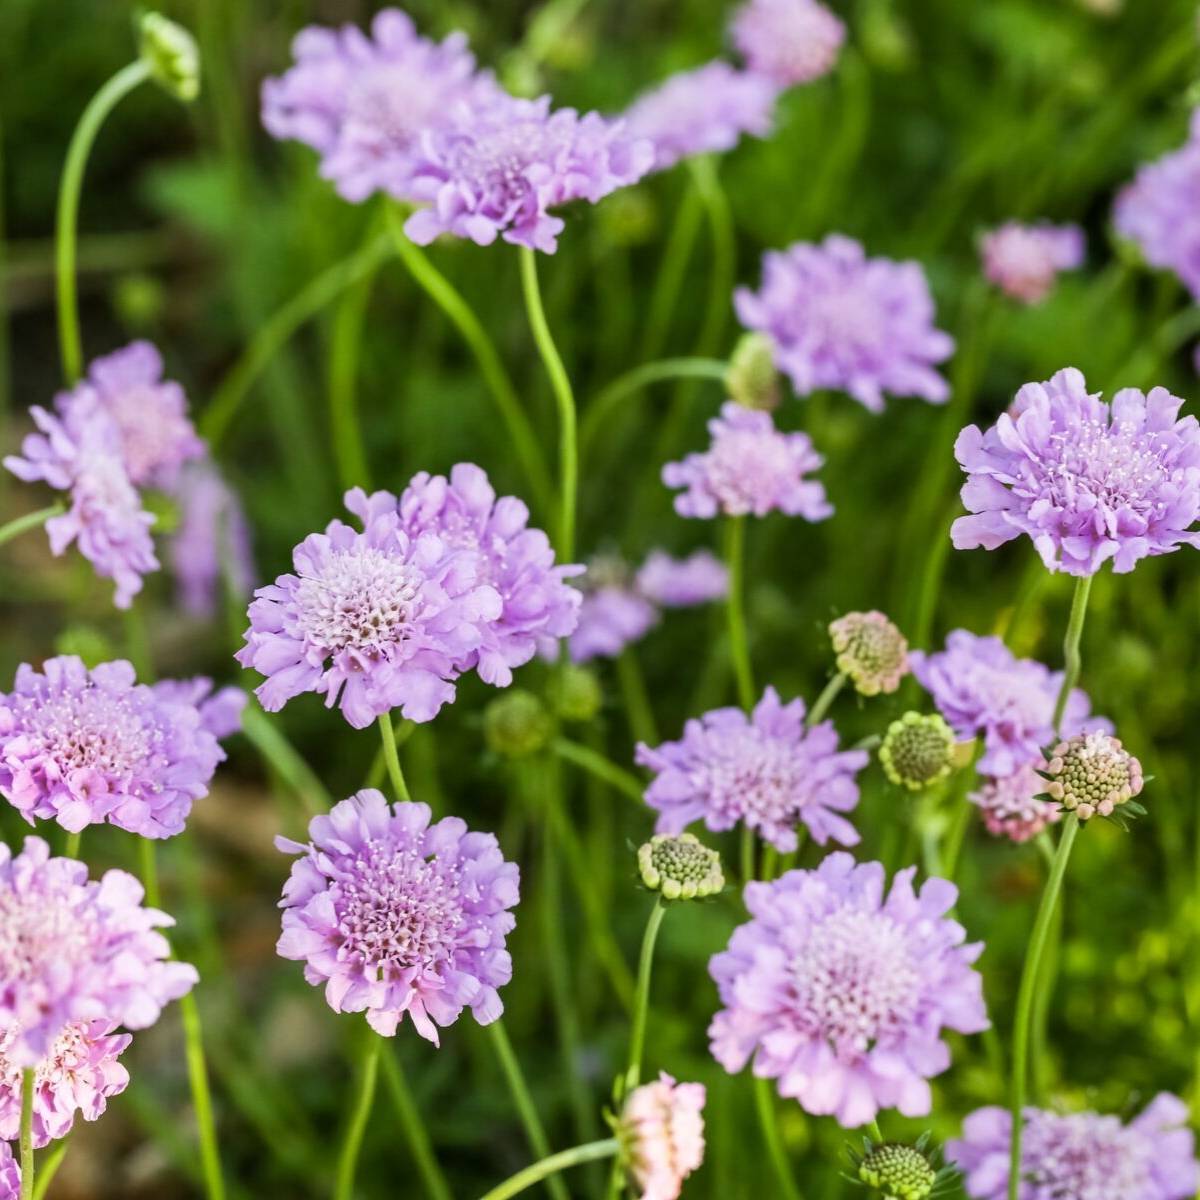 Pincushion Flower Lavender Blue Seeds The Seed Collection